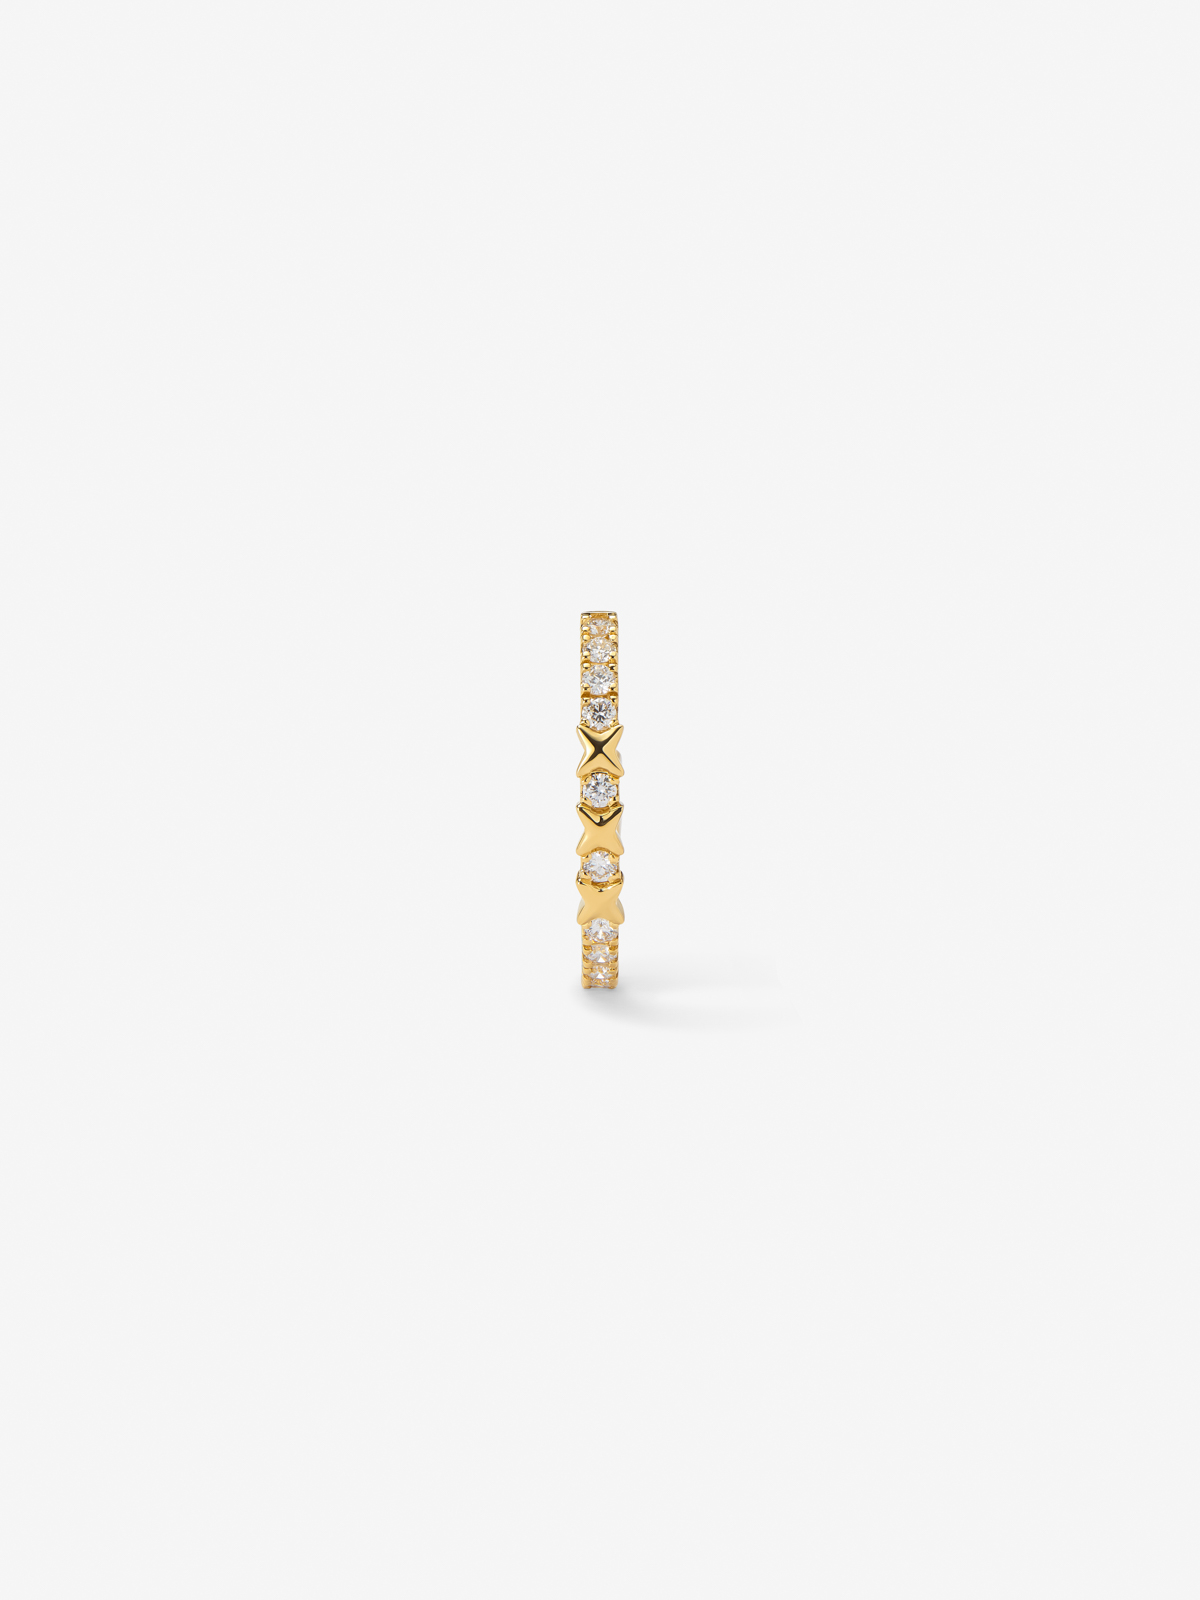 Individual 18K yellow gold hoop earring with 11 brilliant-cut diamonds with a total of 0.14 cts